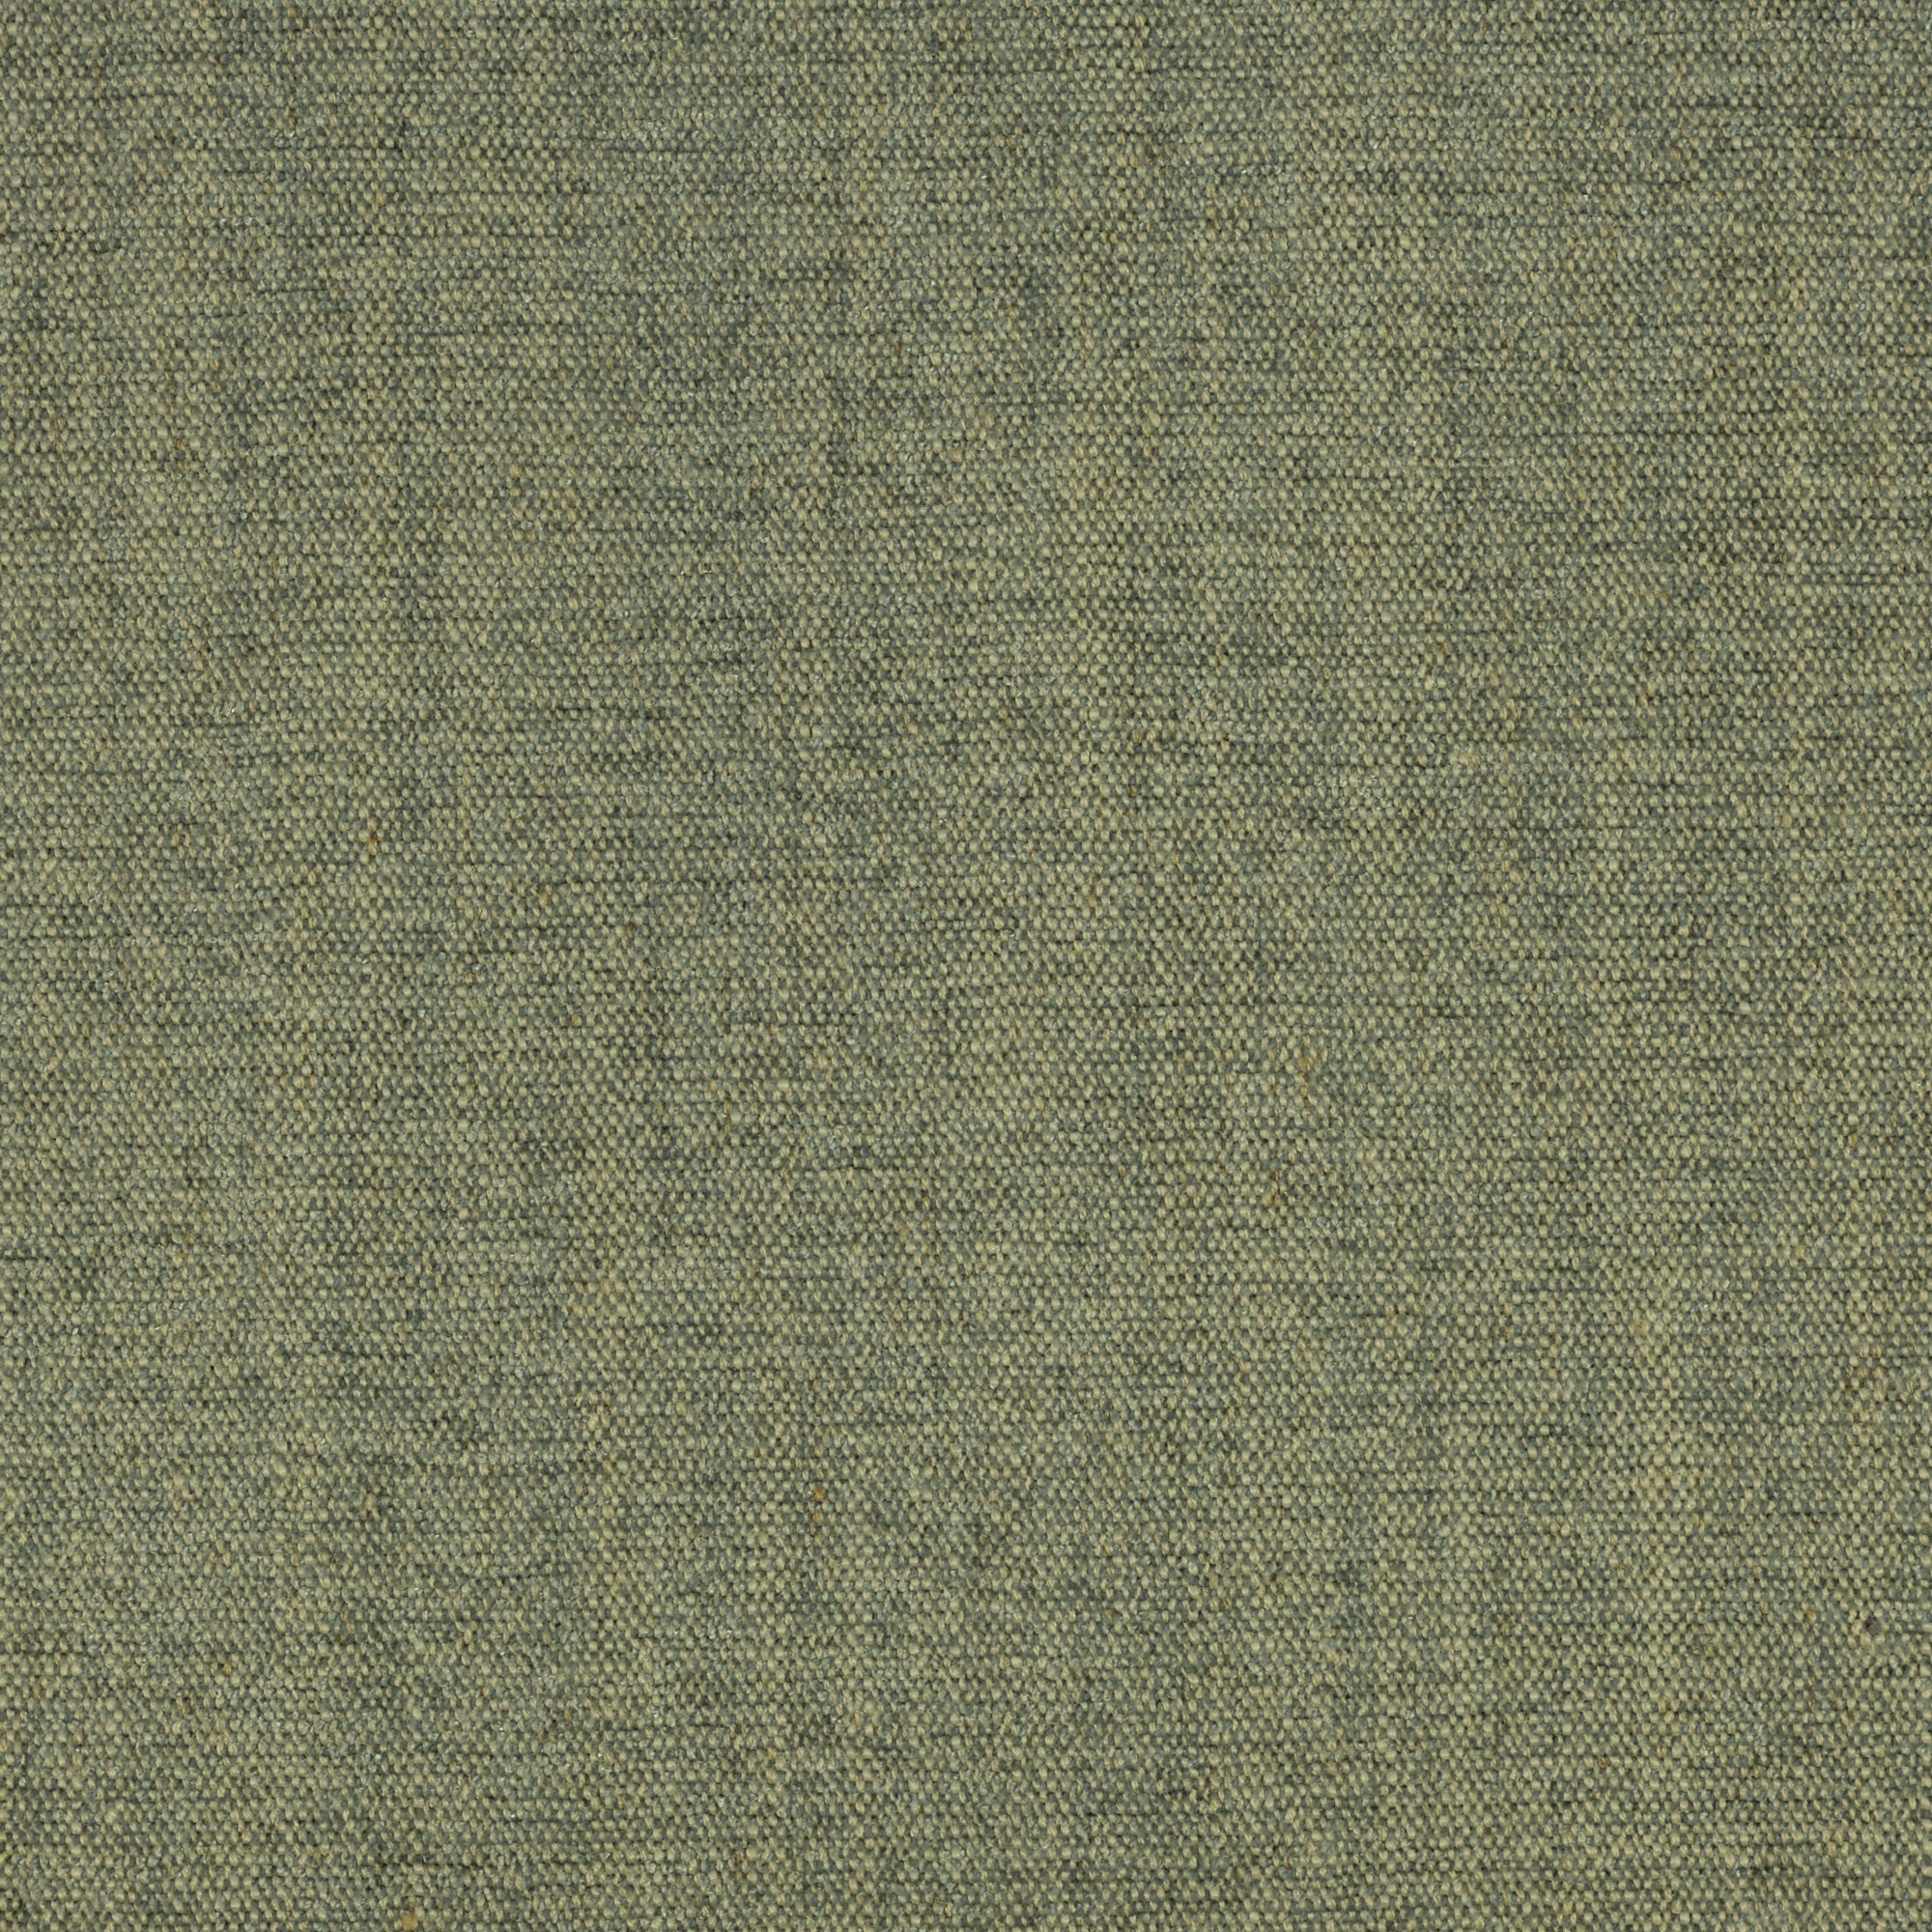 Chenille Fabric | Variegated Green | Heavyweight Upholstery | 54 Wide | By  the Yard 